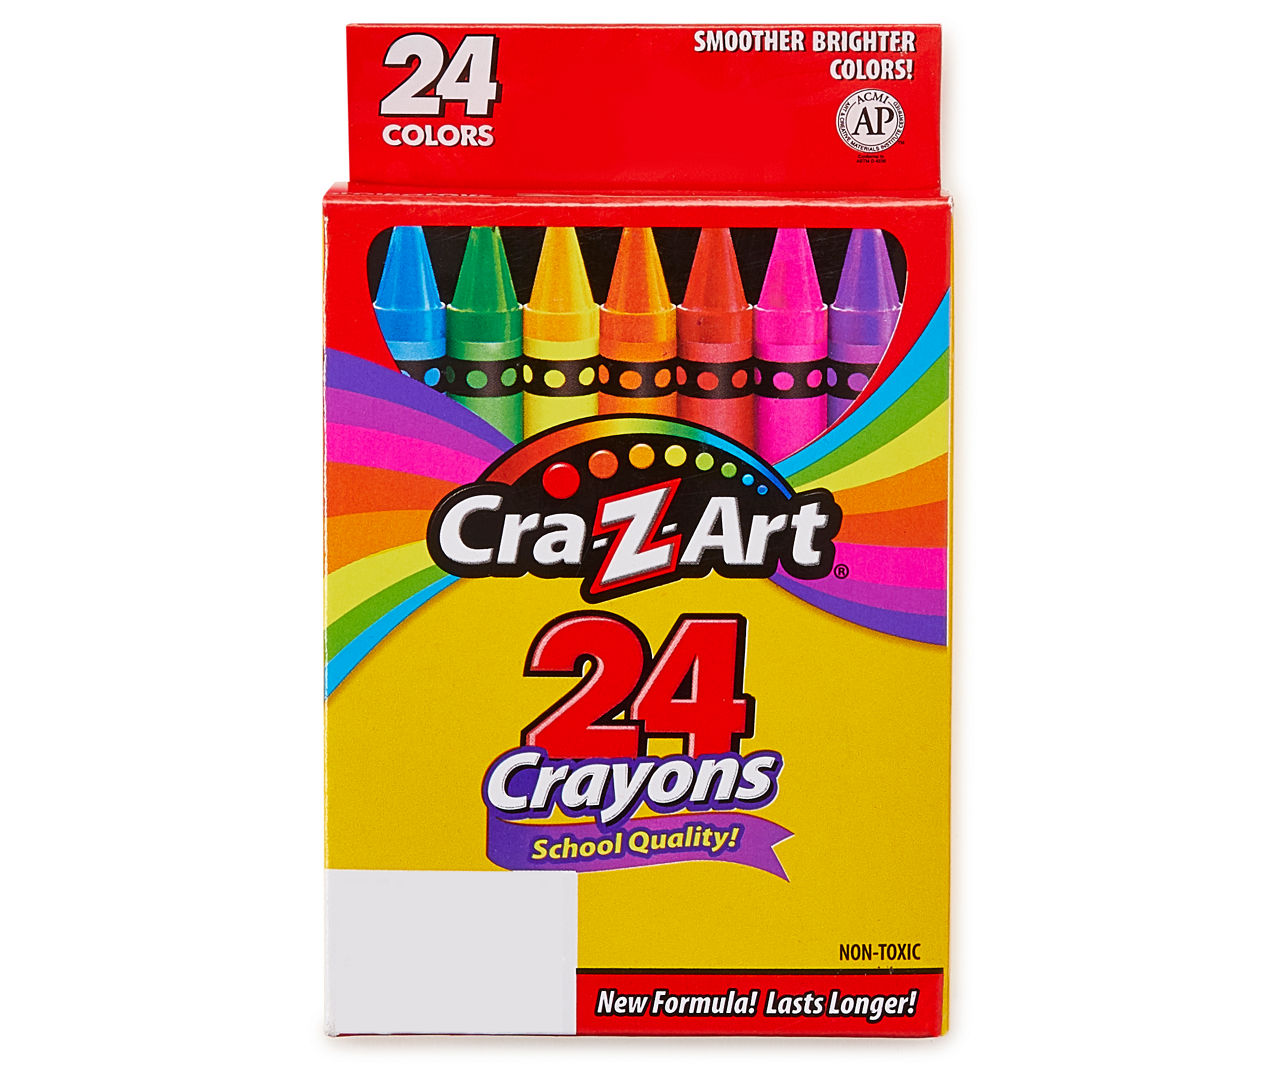  CRA-Z-Art Crayons, 24 Count (6 Pack) : Arts, Crafts & Sewing